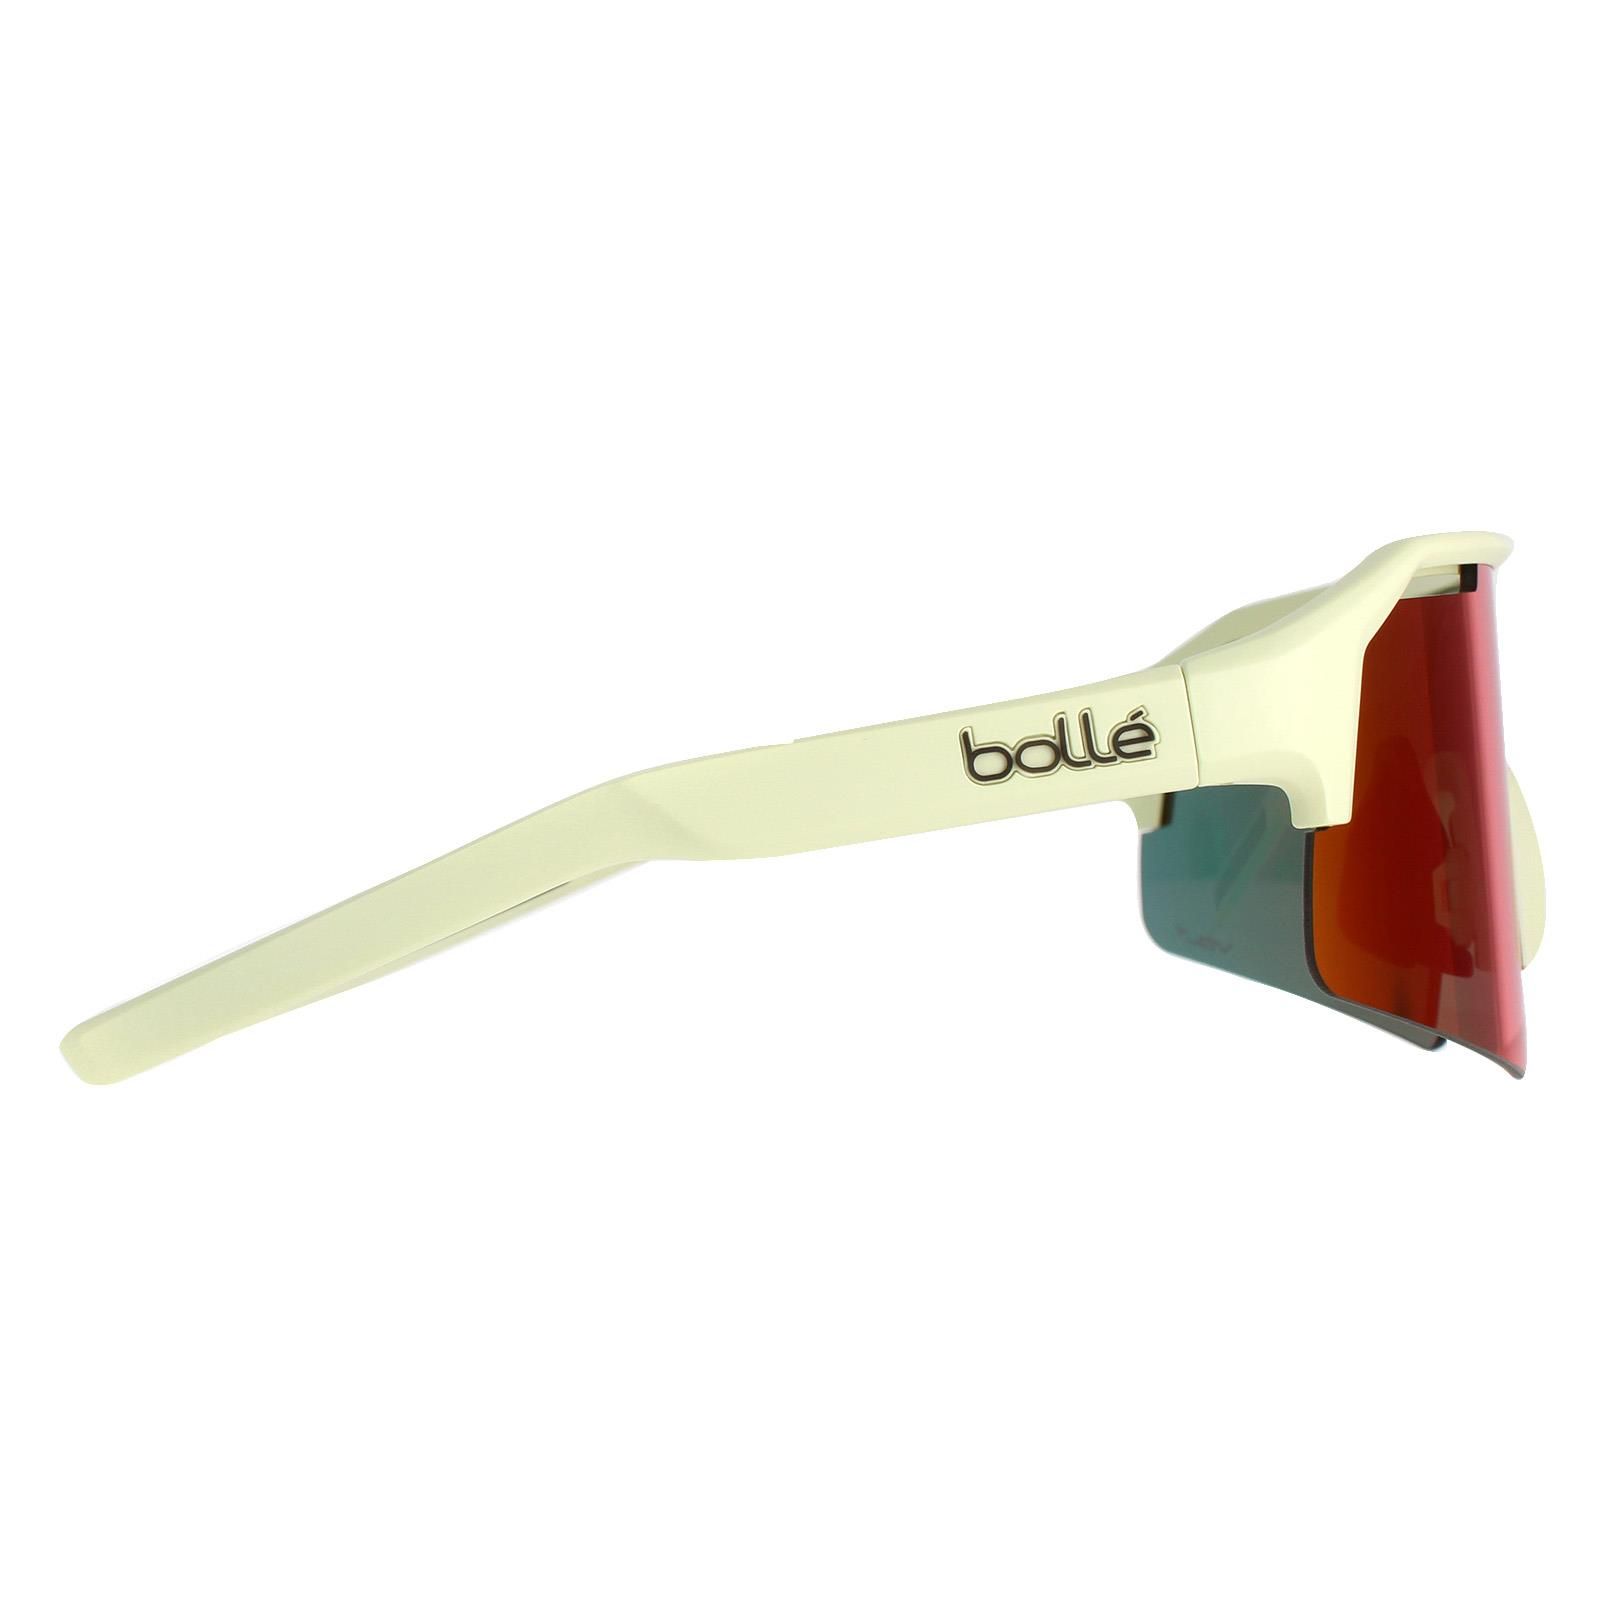 Bolle Shield Unisex Creator Matte Green Volt Ultraviolet C-Shifter  Bolle are from the Bolle performance collection designed for cycling but good for all sports. They have a large shield style lens with extra ventilation.